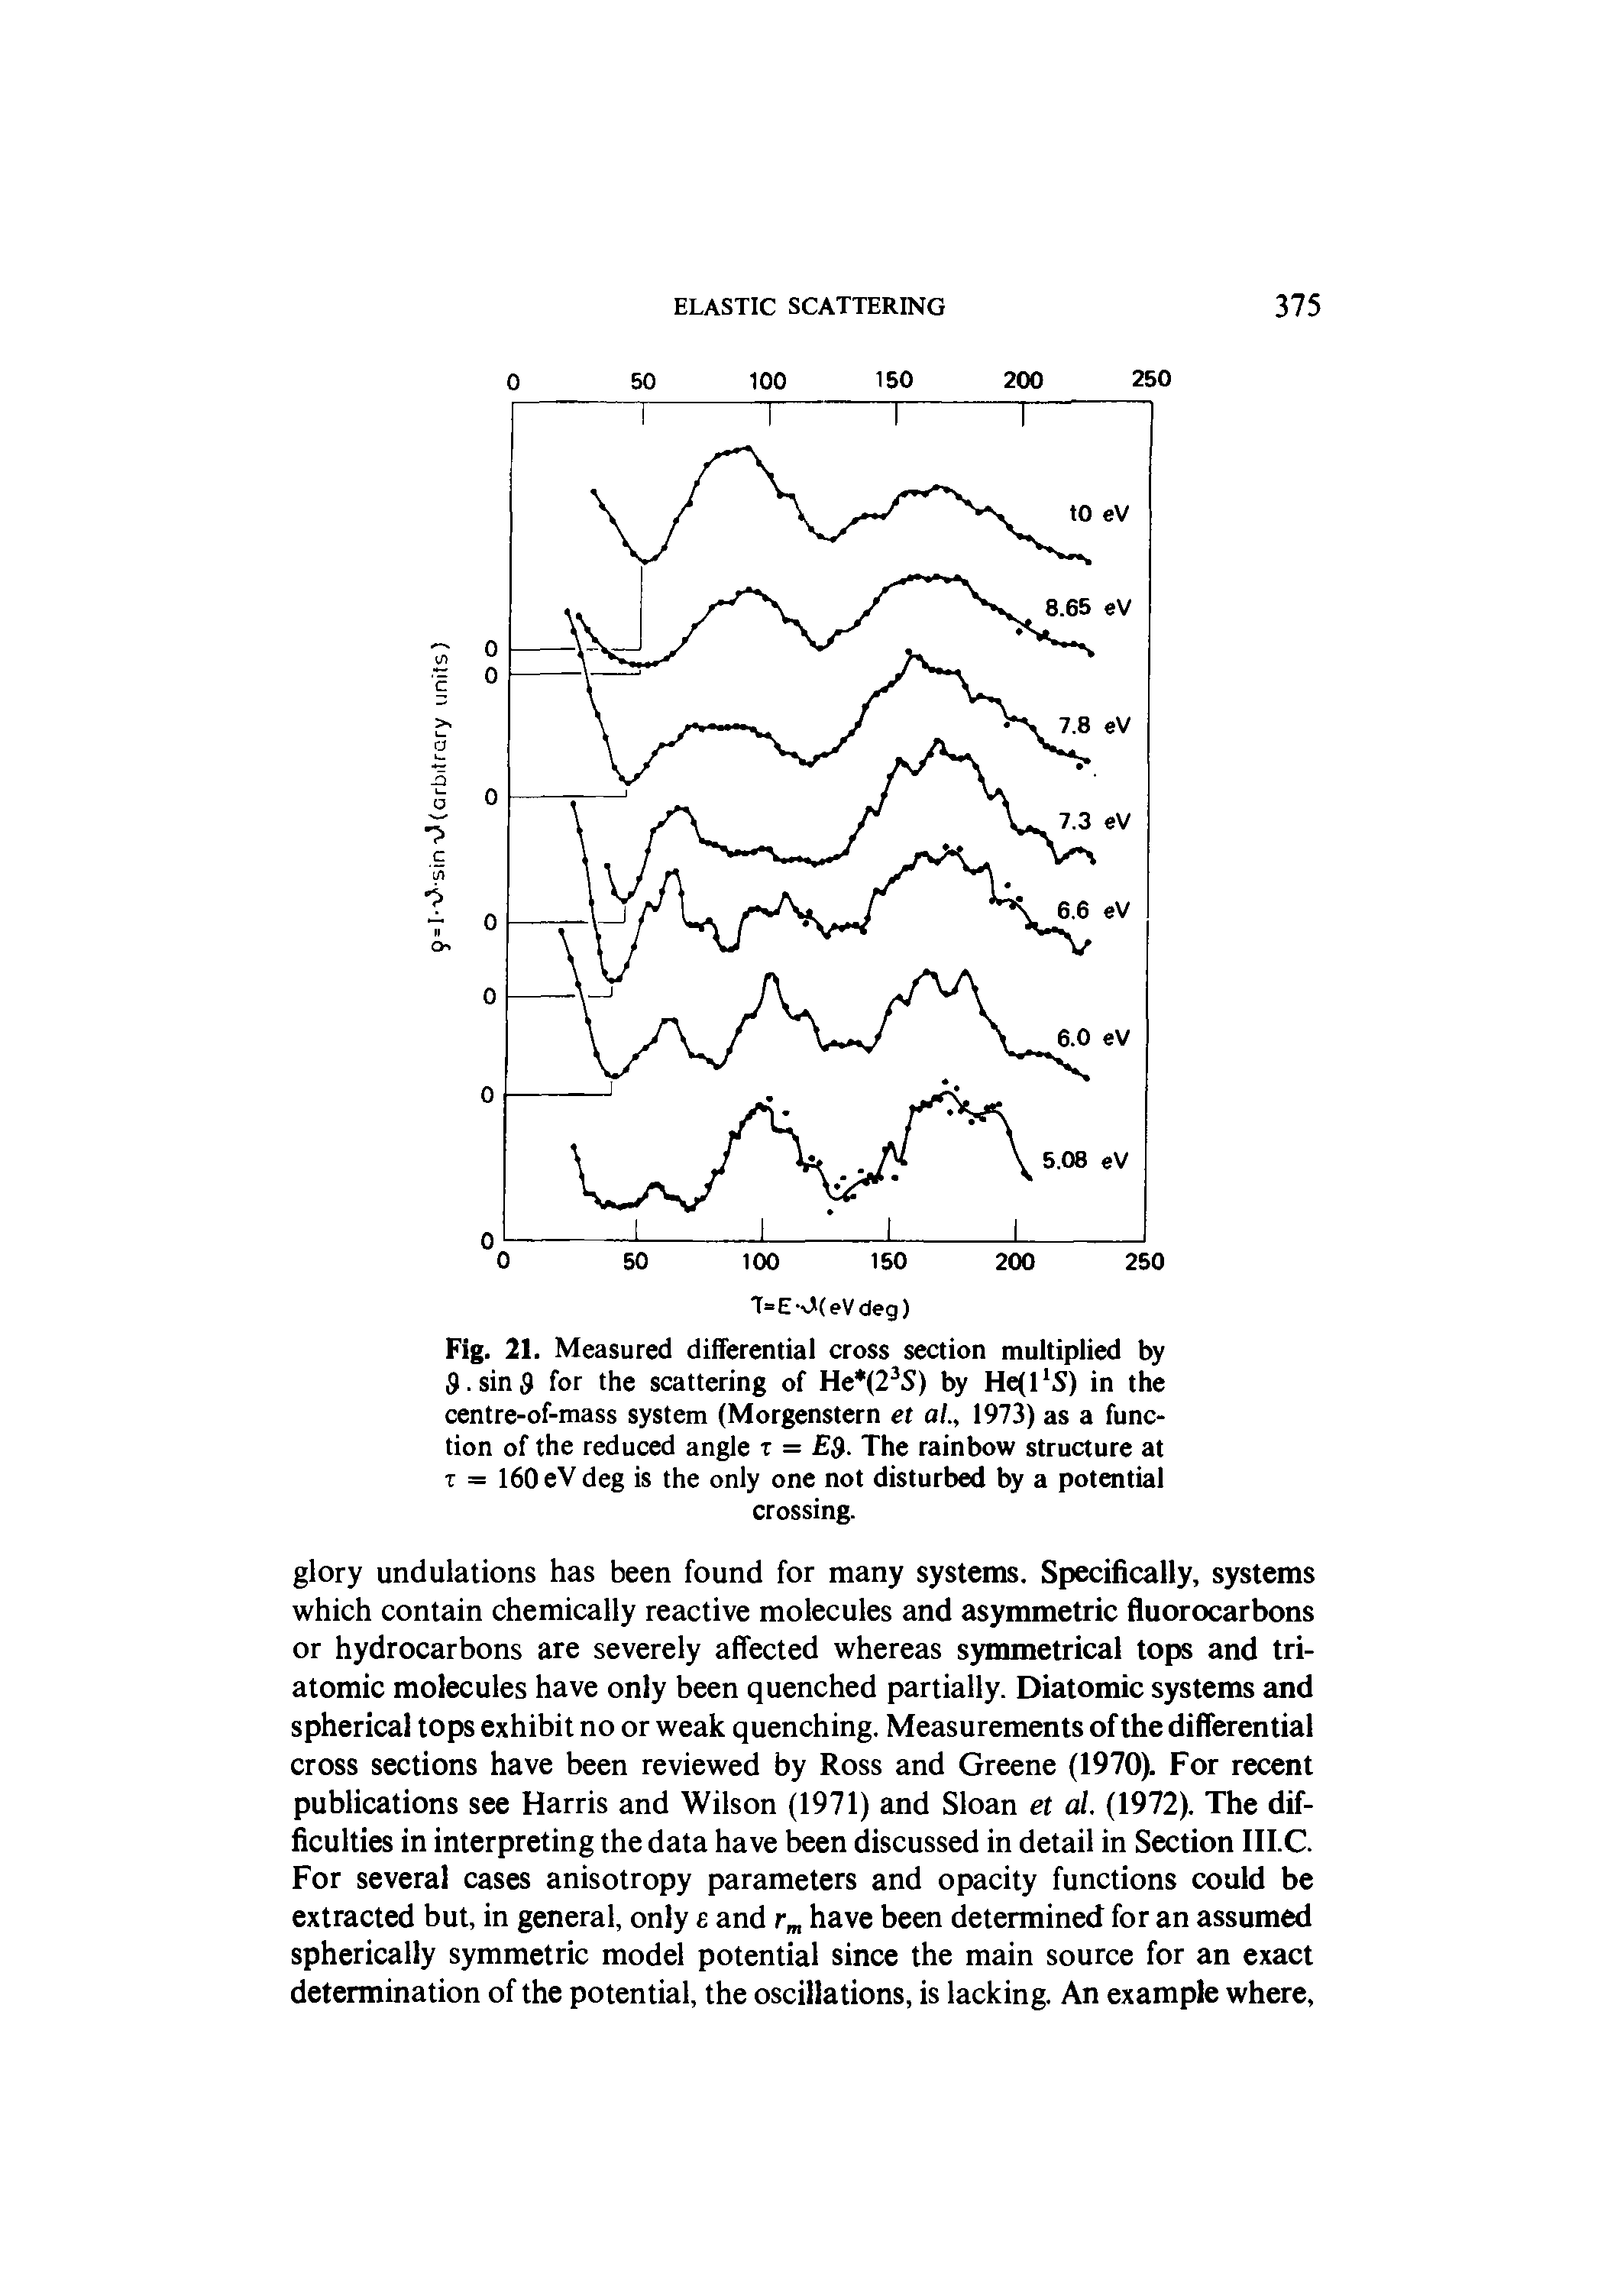 Fig. 21. Measured differential cross section multiplied by 9. sin 9 for the scattering of He (23S) by Hefl S) in the centre-of-mass system (Morgenstern et al., 1973) as a function of the reduced angle t = 9- The rainbow structure at t = 160 eV deg is the only one not disturbed by a potential crossing.